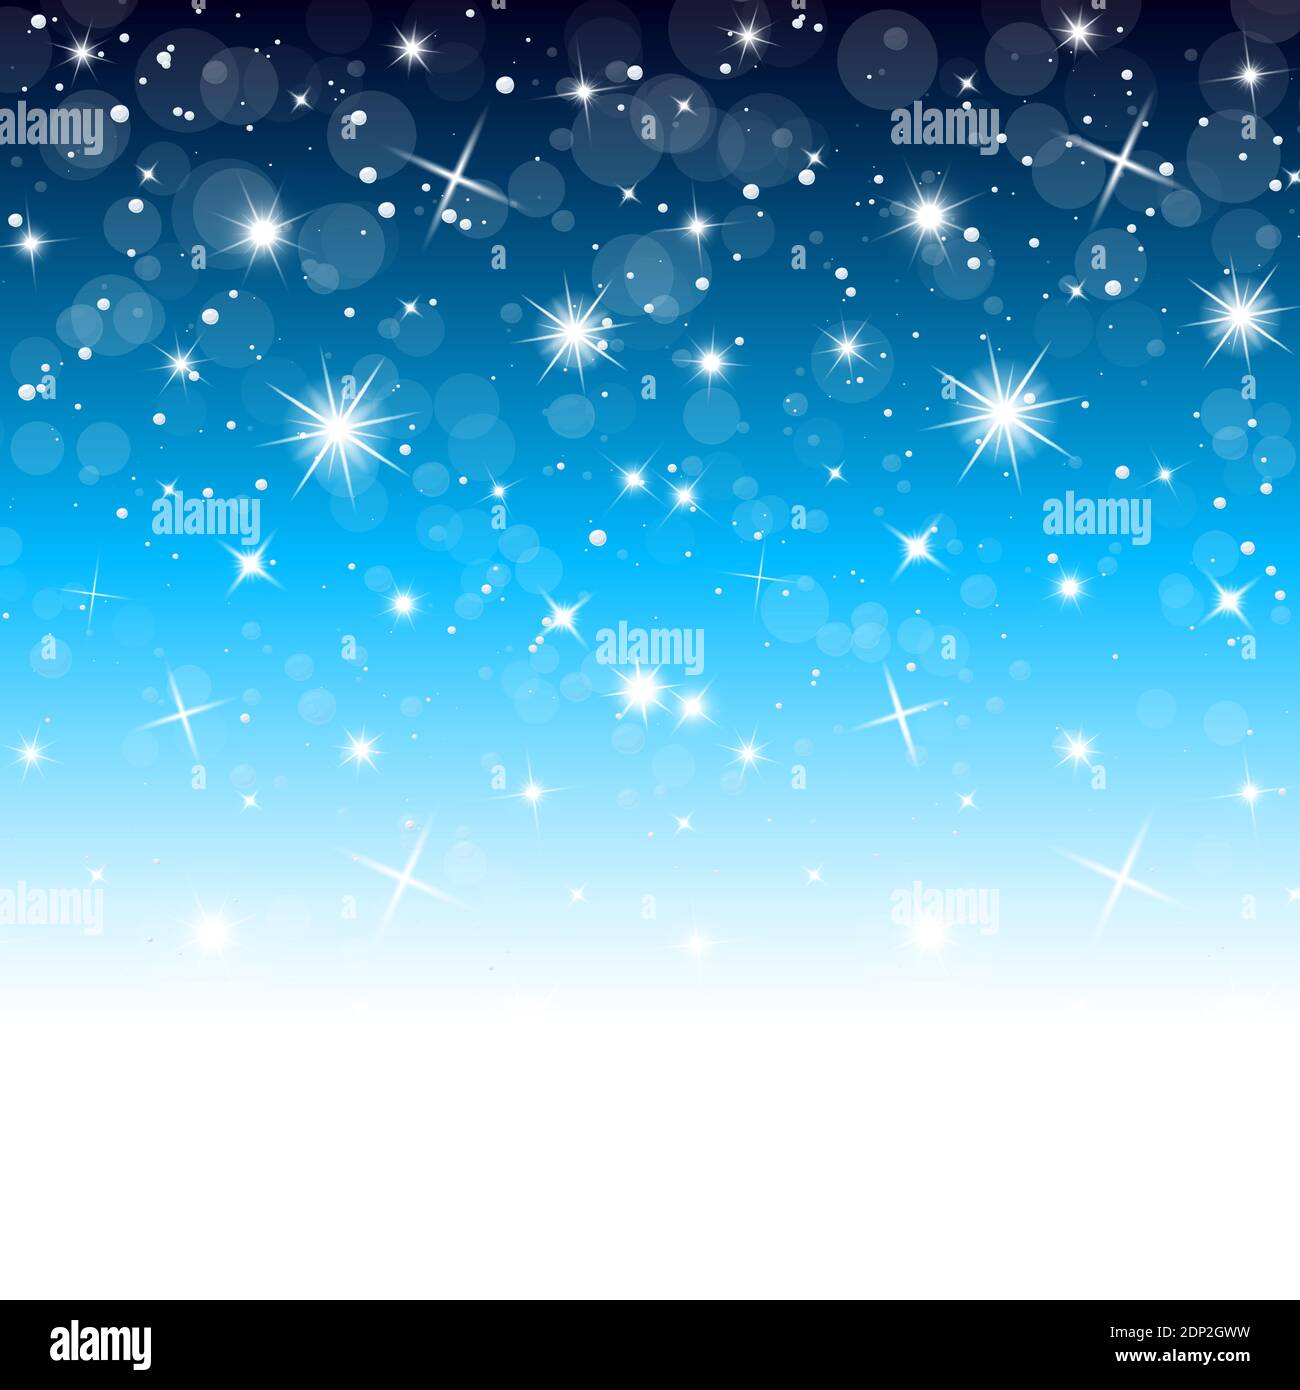 Falling snow blue christmas background. Winter vector illustration for backdrop or christmas card. Design template with glowing stars and snowfall. Se Stock Vector